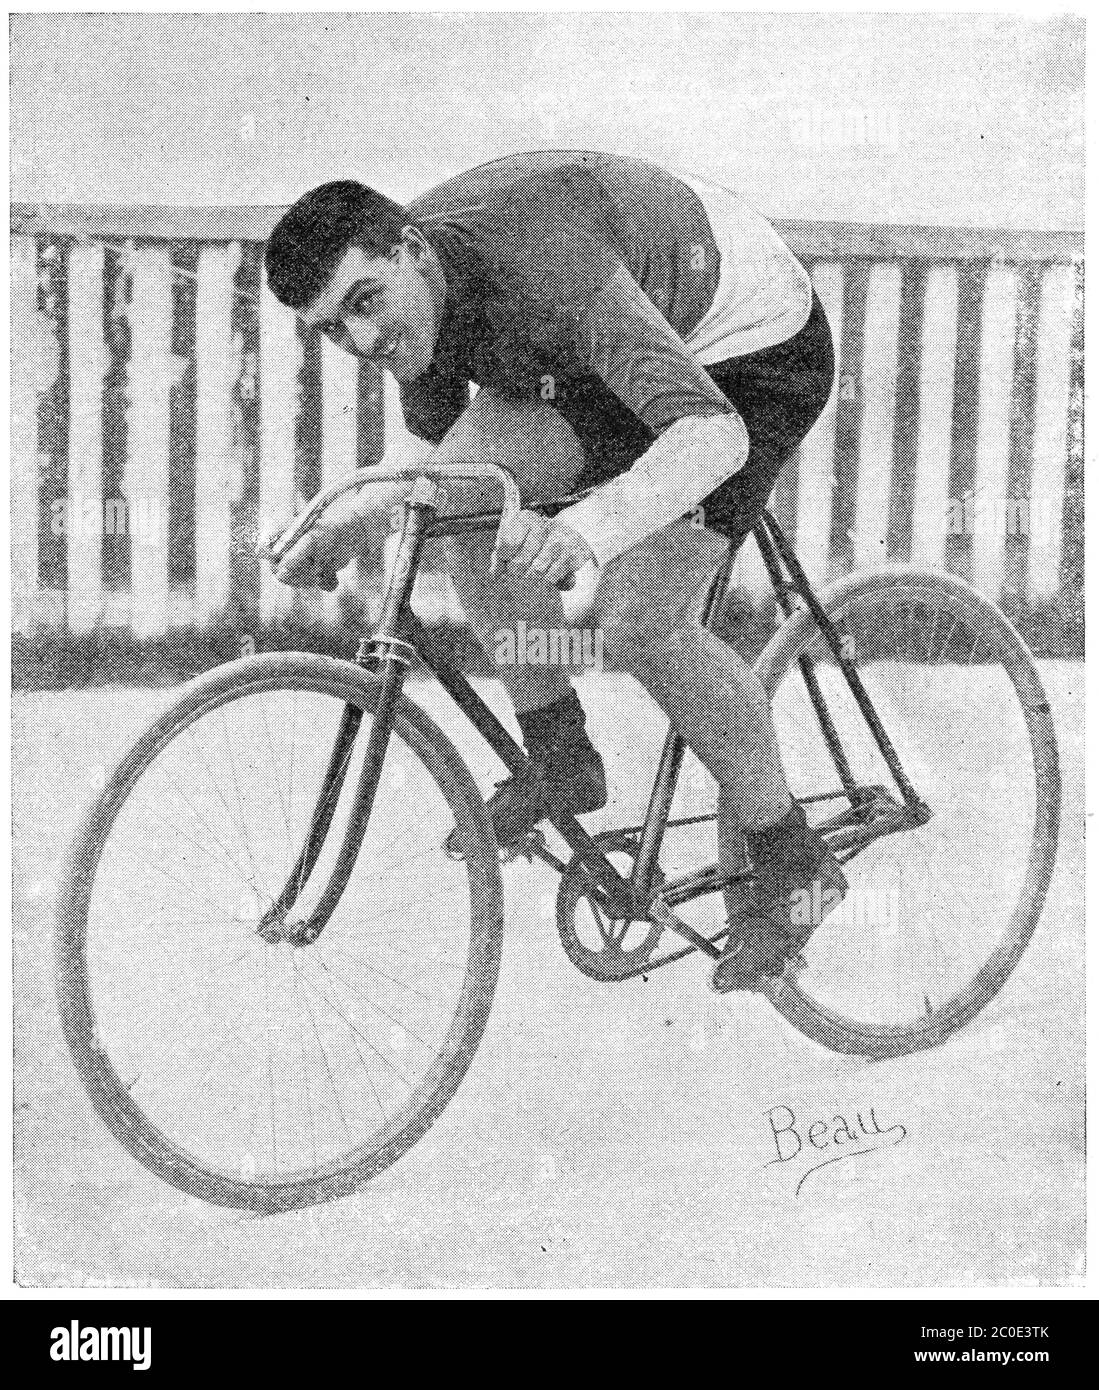 Prize-winner of the World Sprint Championships of 1896 (ICA Track Cycling World Championships) - Edmond Jacquelin. Illustration of the 19th century. Stock Photo